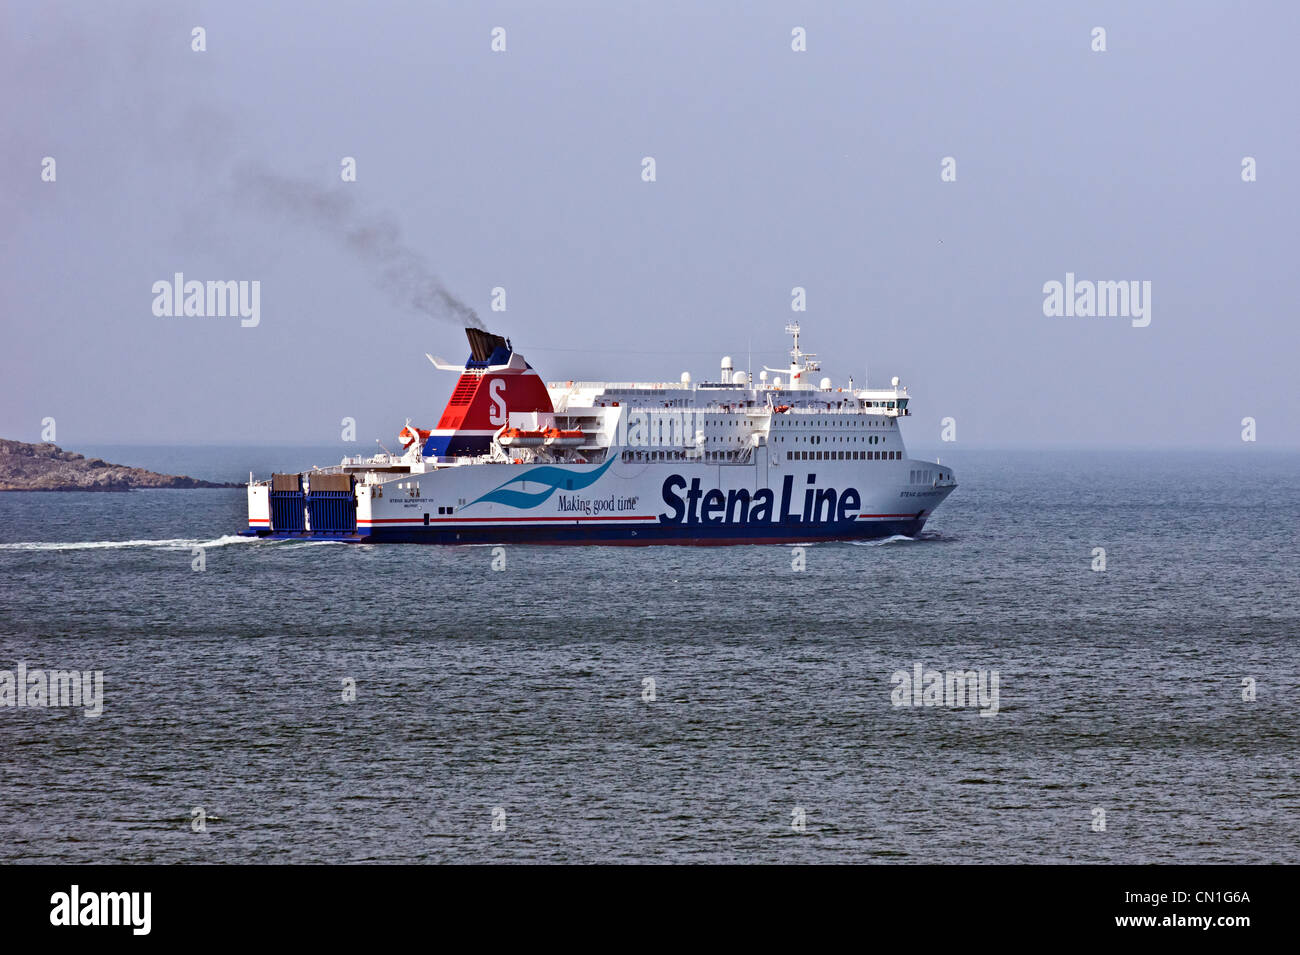 New Stena line car and passenger RoRo ferry Stena Superfast VIII has just left the new port at Cairnryan and heading to Belfast. Stock Photo